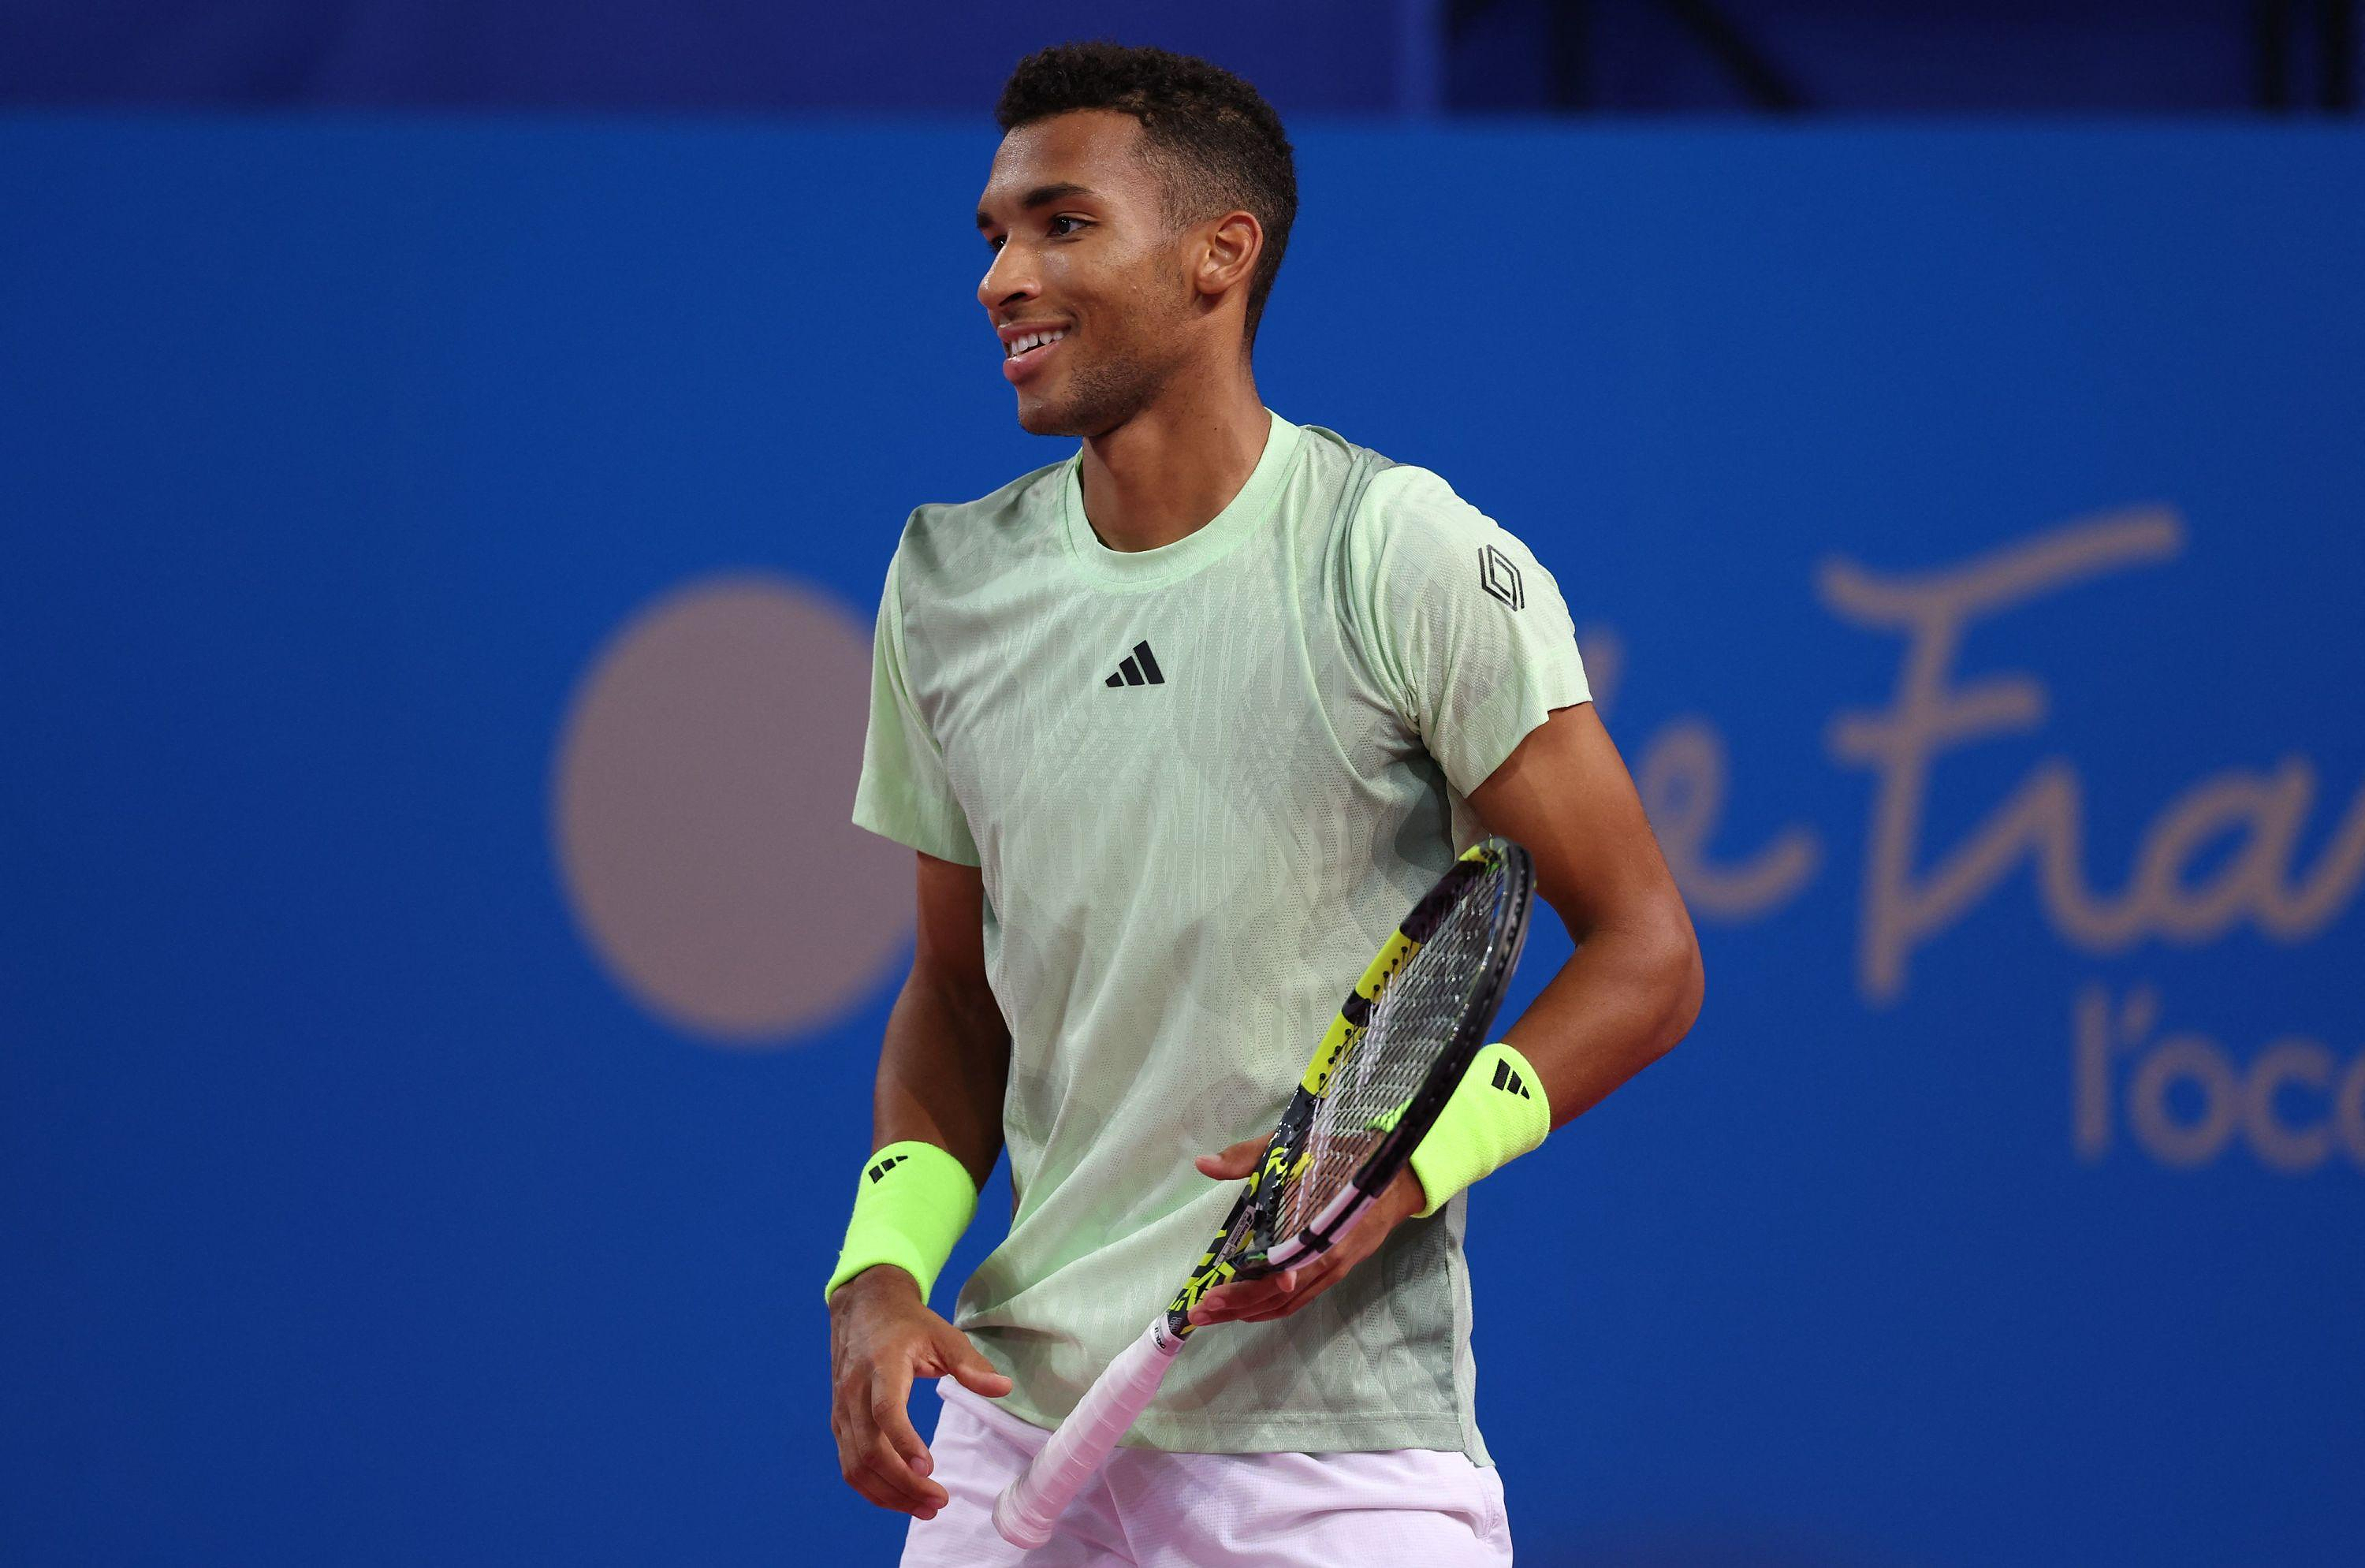 Tennis: at the end of a beautiful duel, Félix Auger-Aliassime overcomes Arthur Cazaux in Montpellier